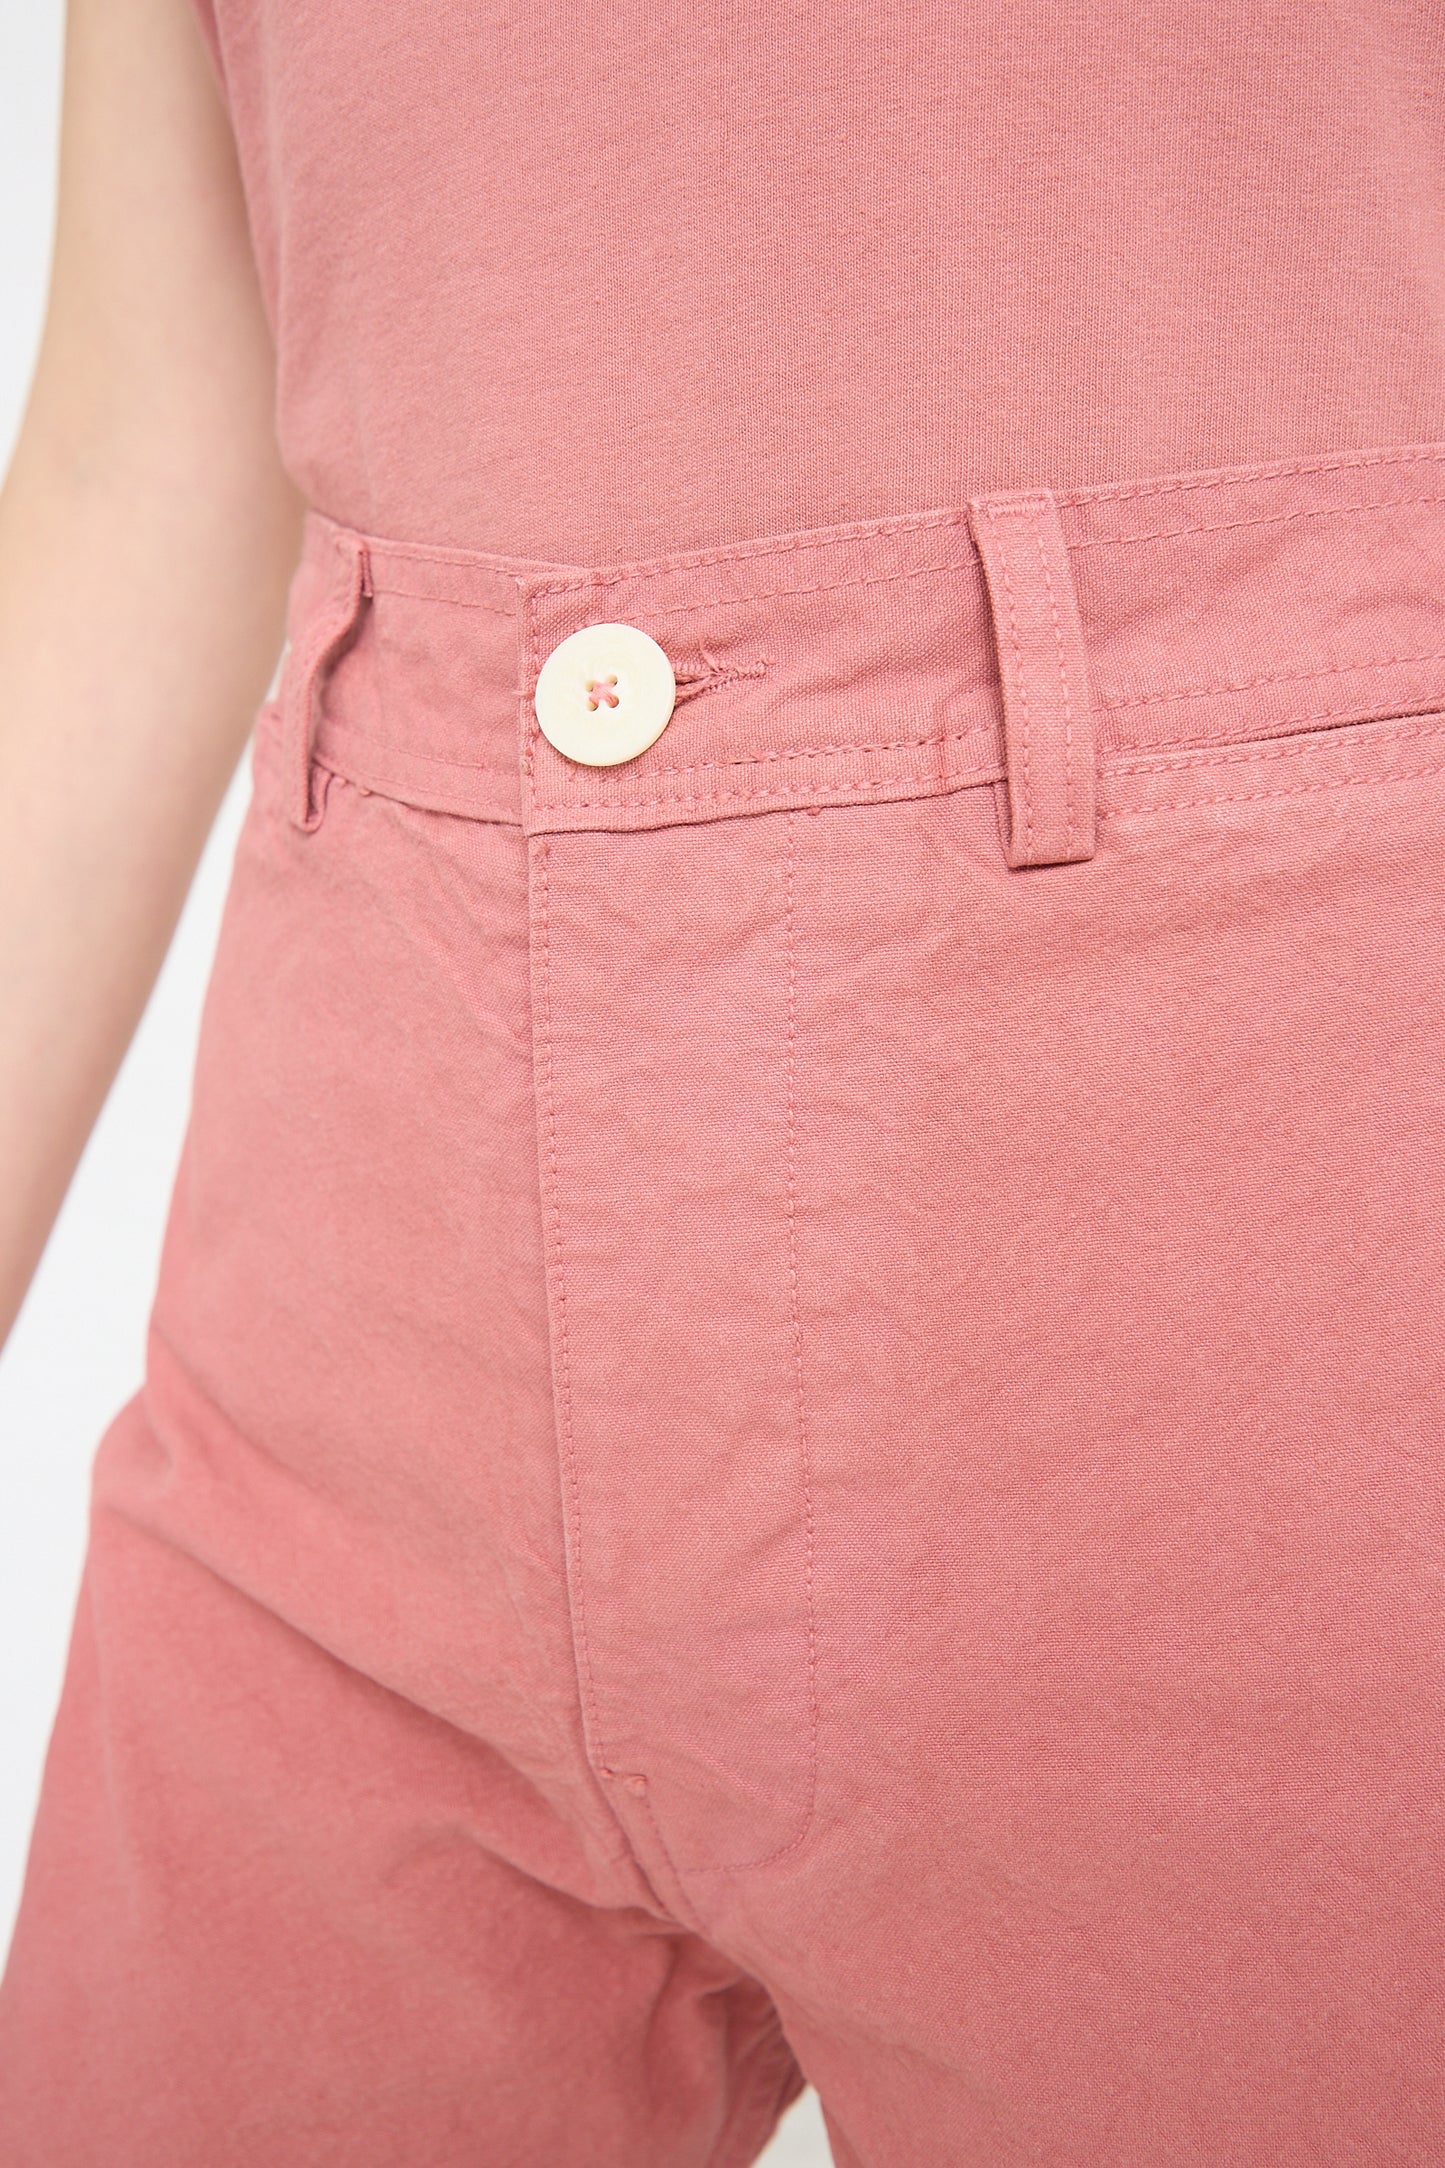 Sailor Pant in Dogwood for women with a high waist and buttons, made from organic cotton canvas by Jesse Kamm.